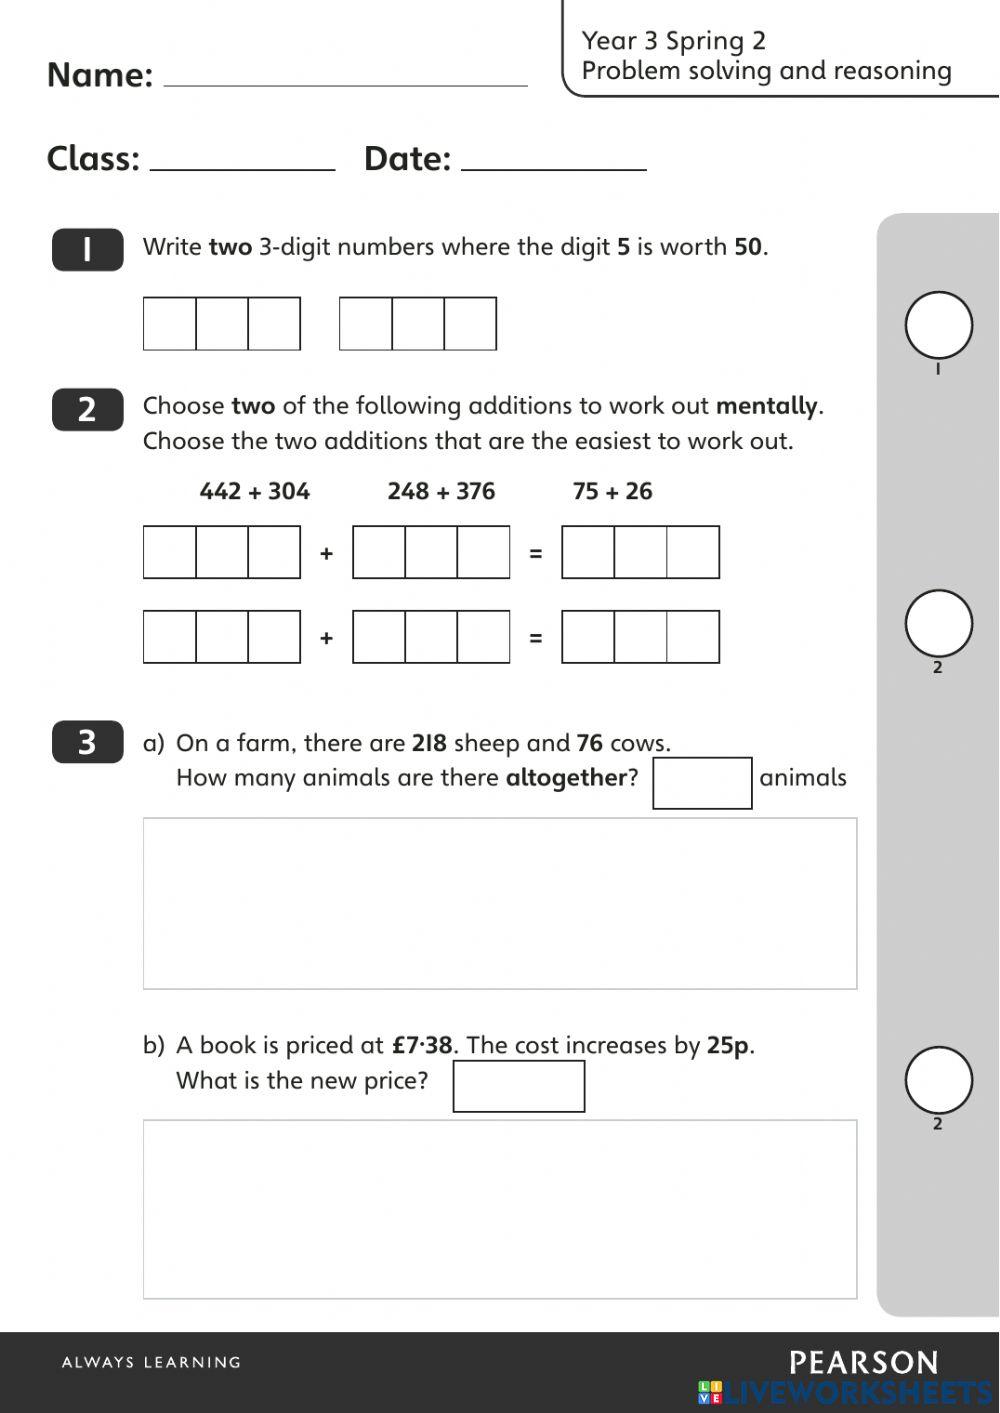 Year 3 Spring 2 Problem solving and reasoning